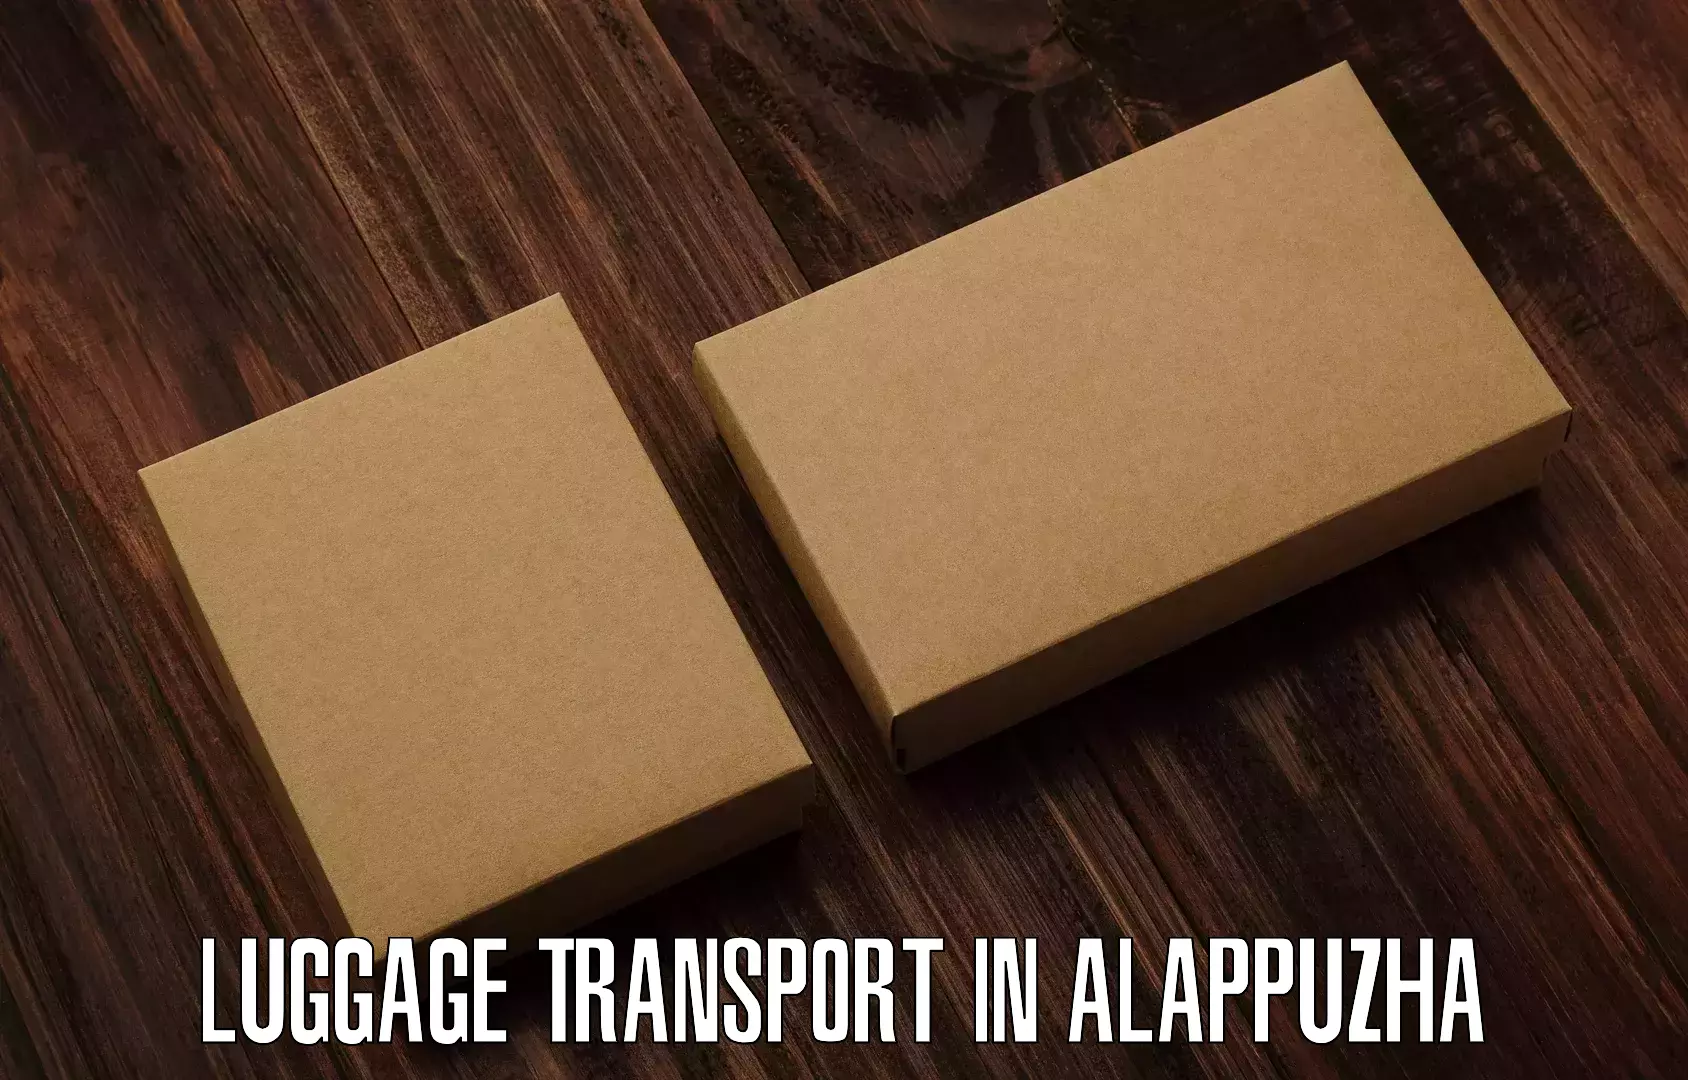 Baggage relocation service in Alappuzha